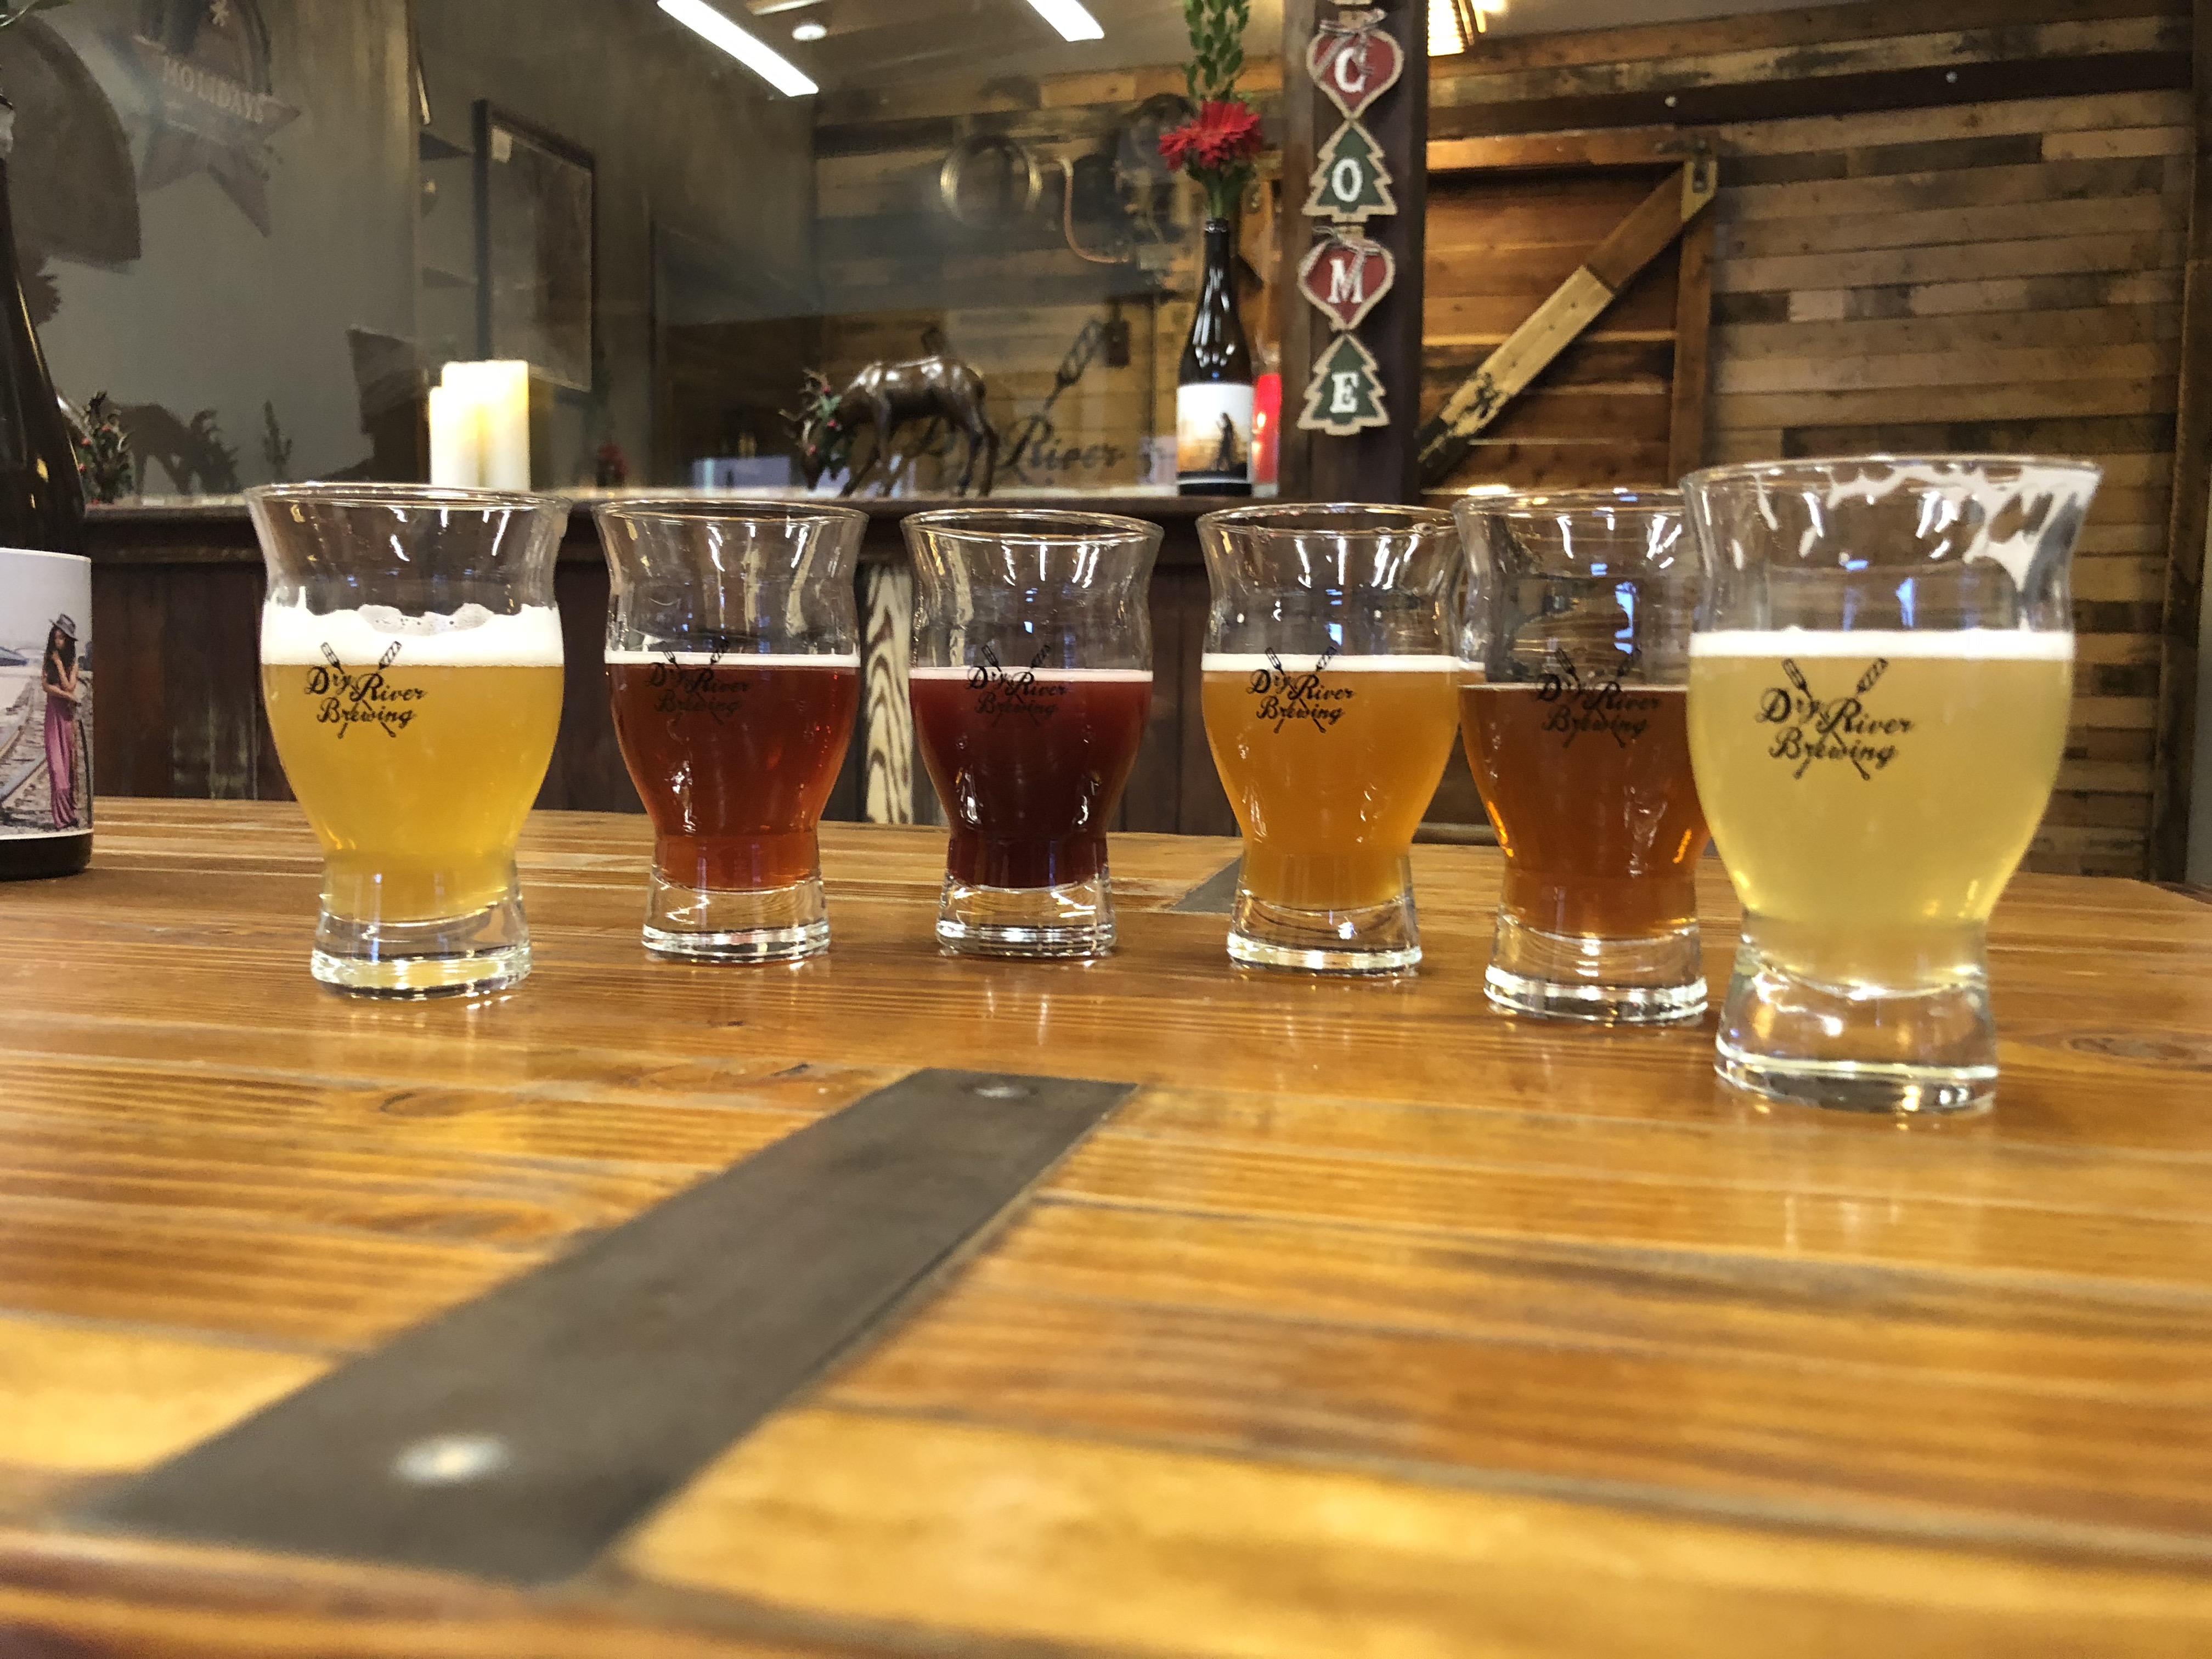 A taster tray at Dry River Brewing in Los Angeles.